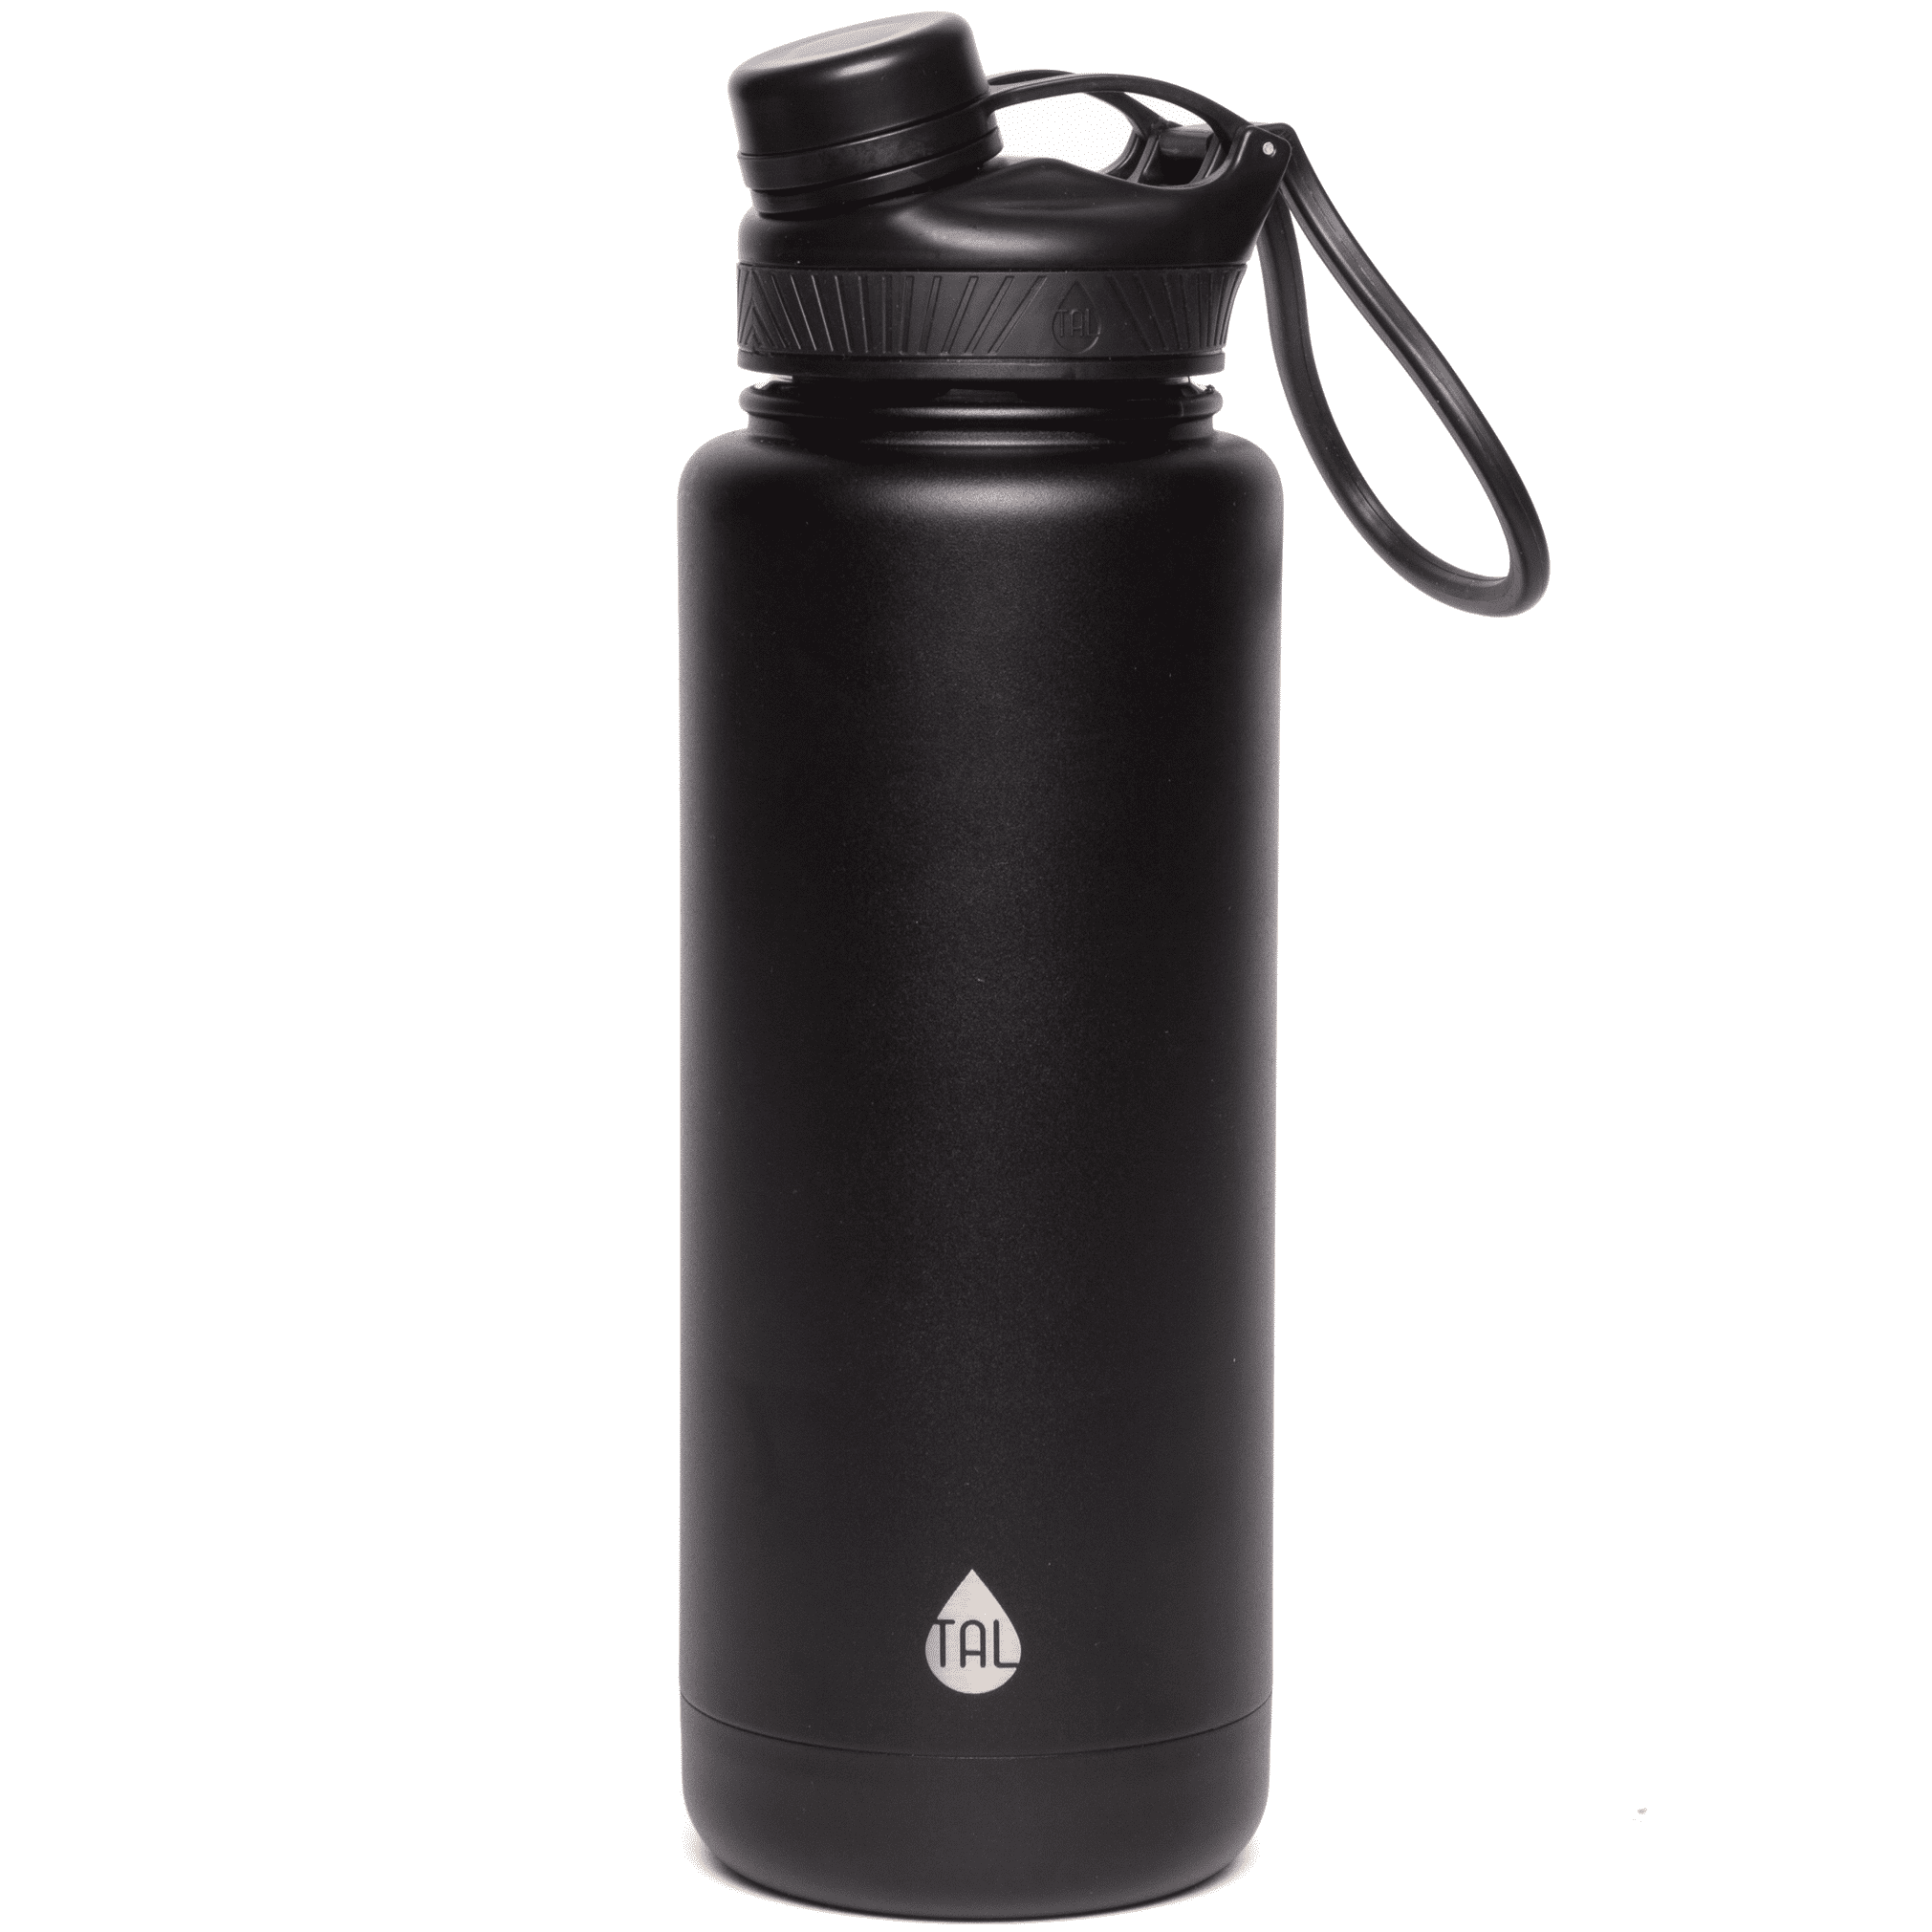 TAL Ranger 40 oz Black Insulated Stainless Steel Water Bottle with Wide Mouth and Flip-Top Lid